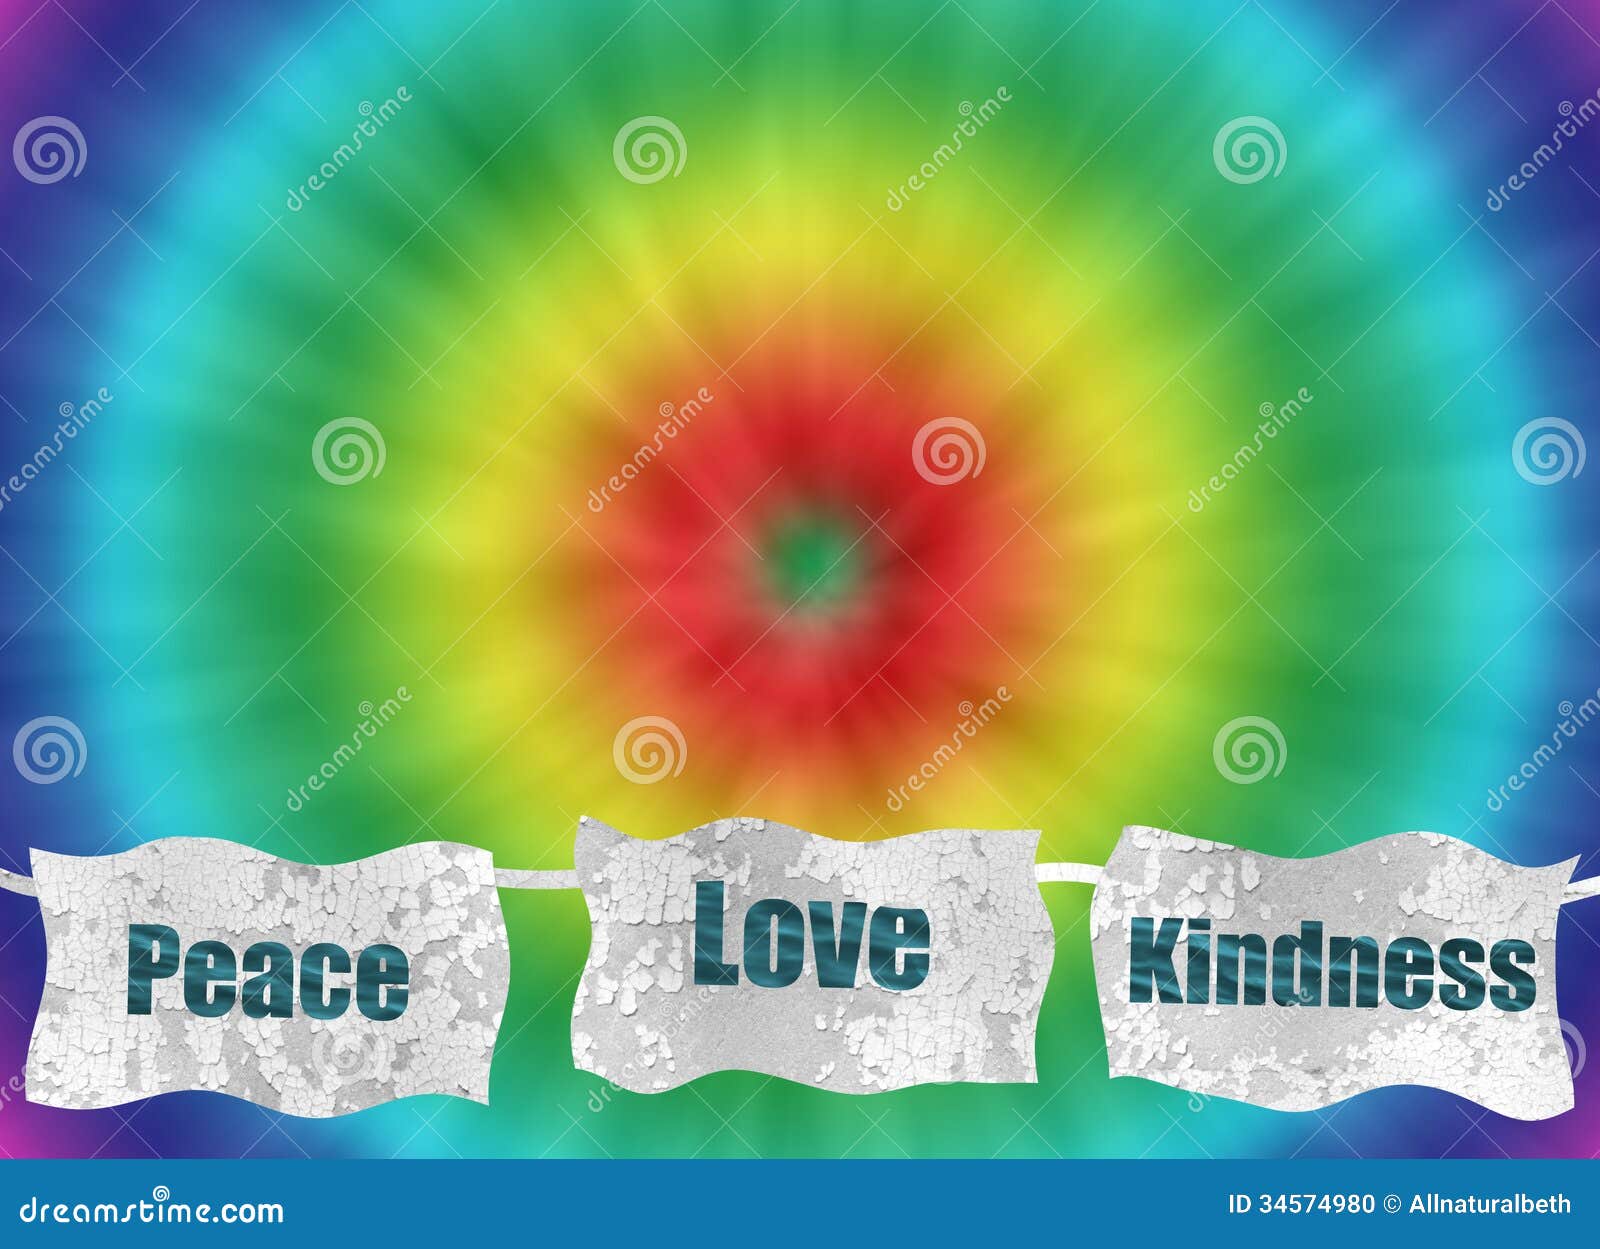 Download Peace Love And Kindness Retro Tie-dye Background Stock ...